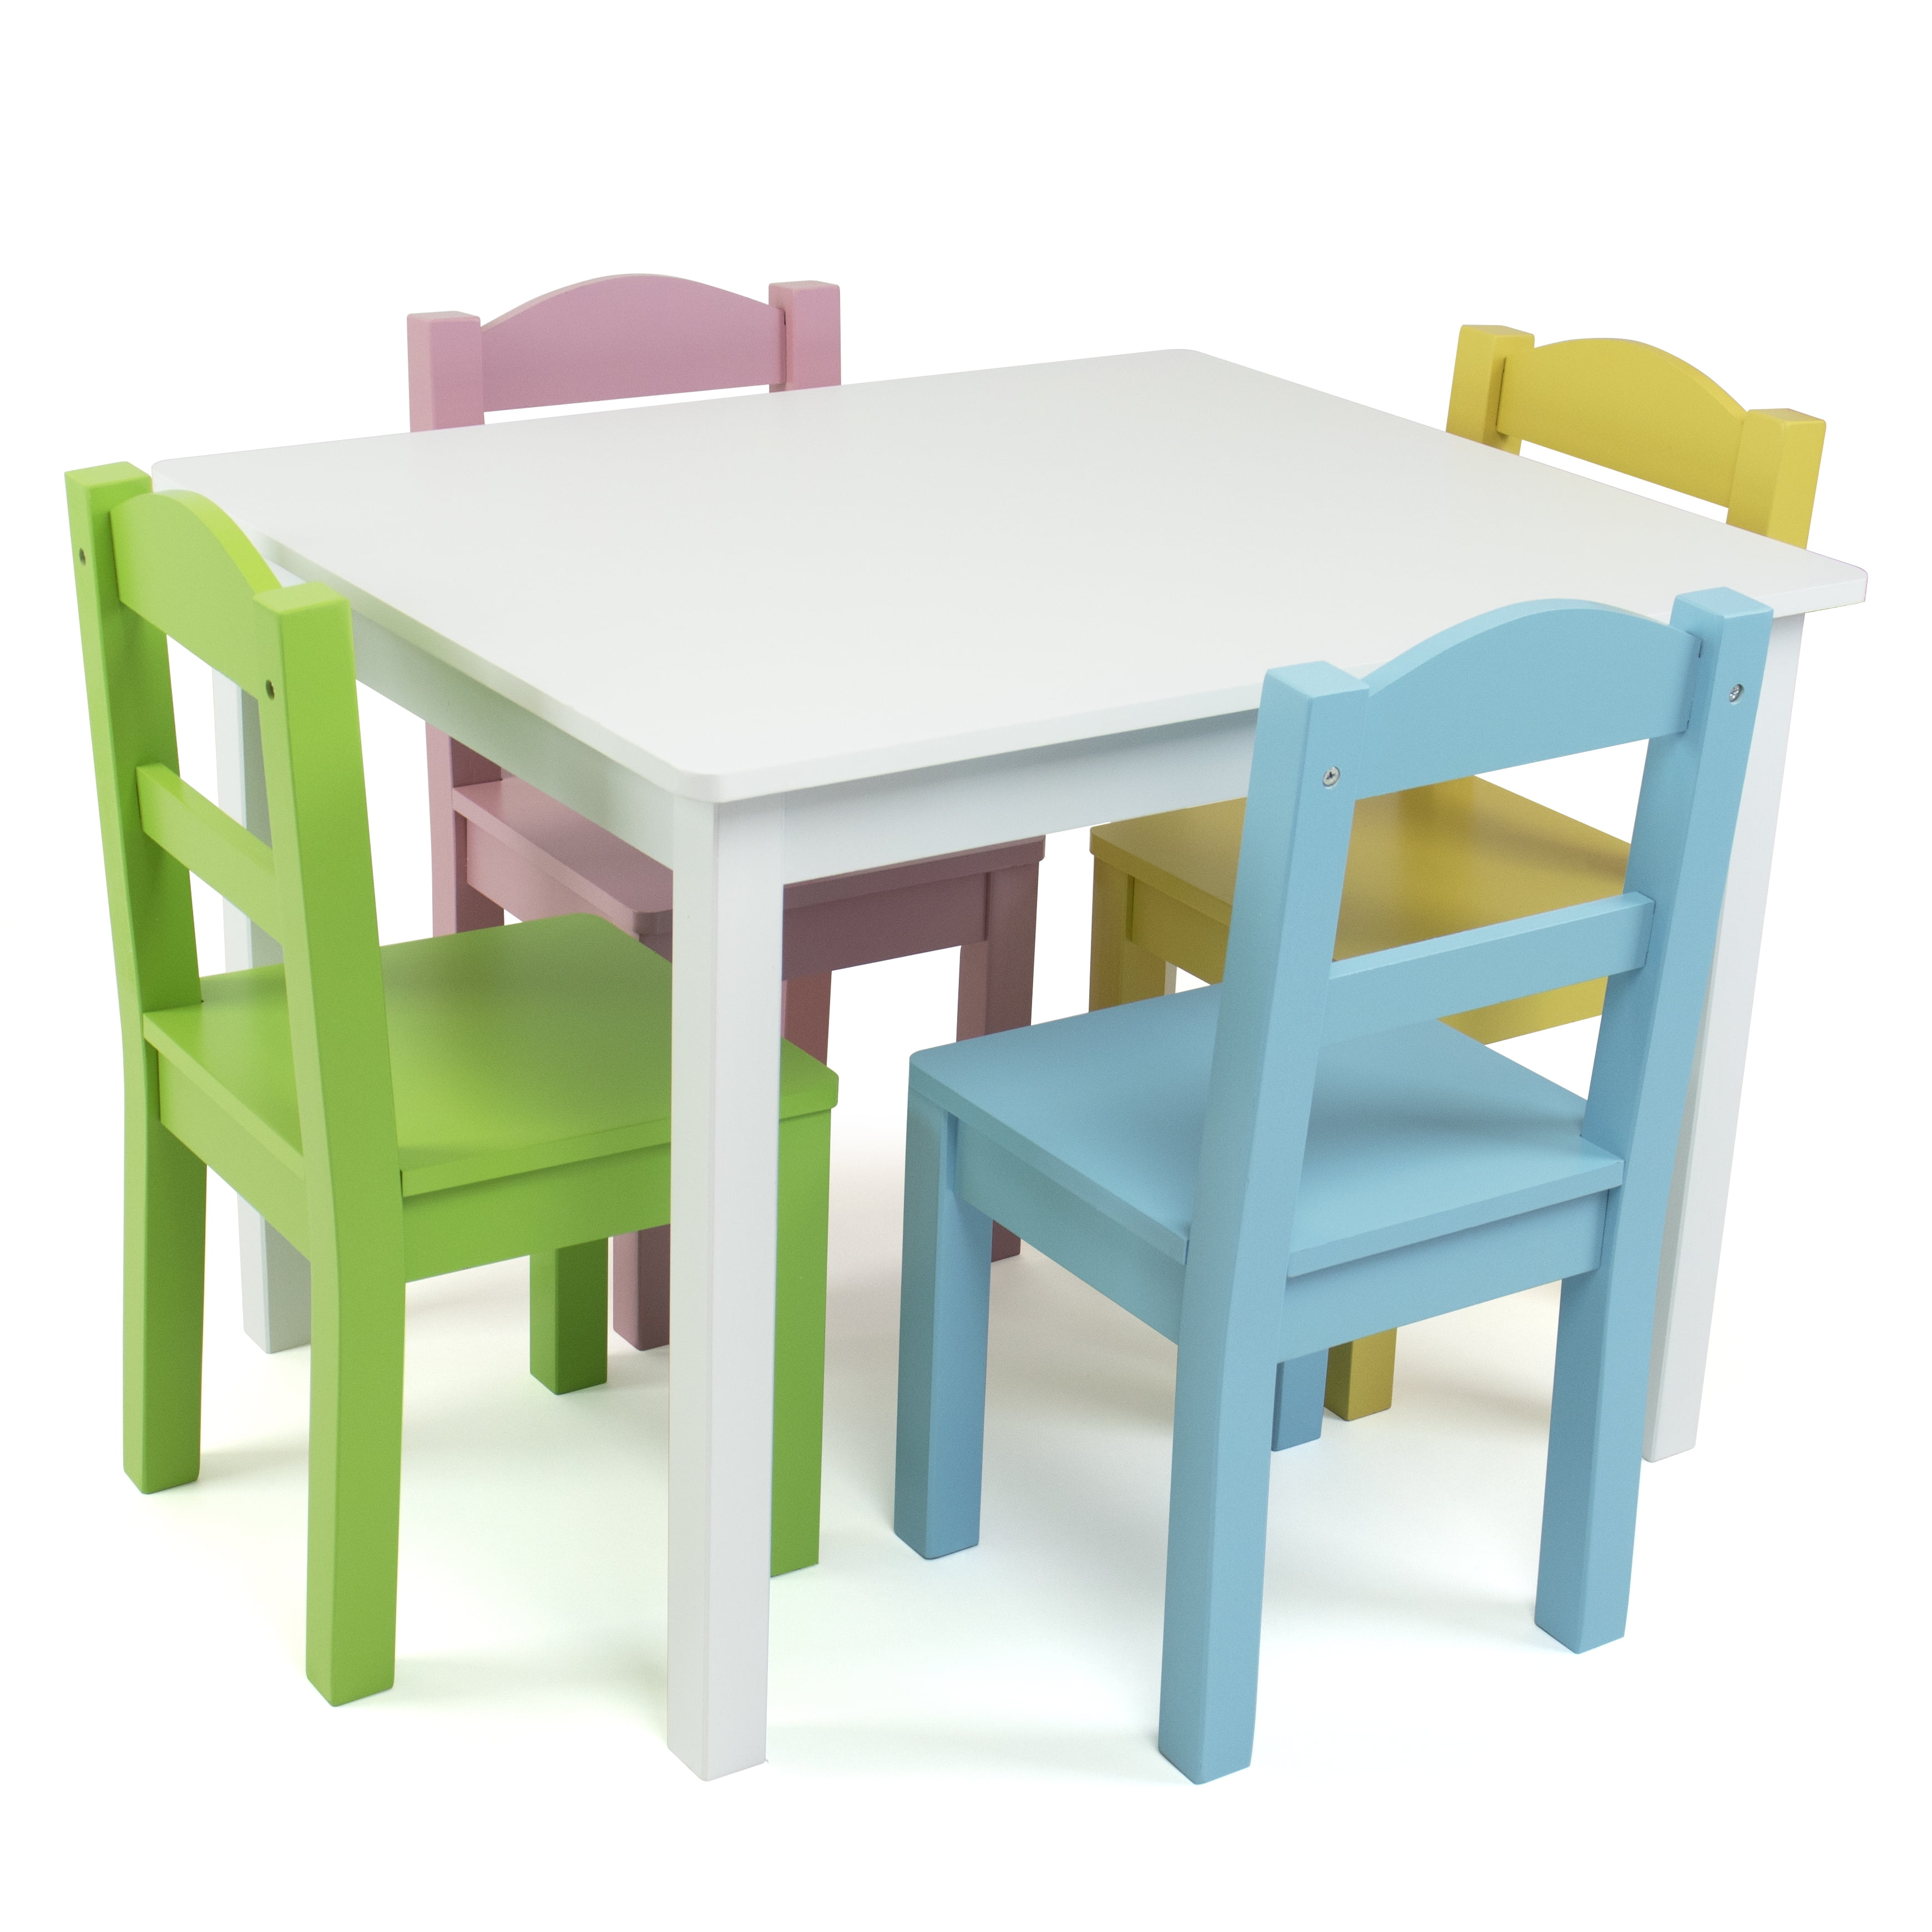 Toys Children's Multi-Coloured Table & 4Chairs Set Activity Furniture In-Outdoor 